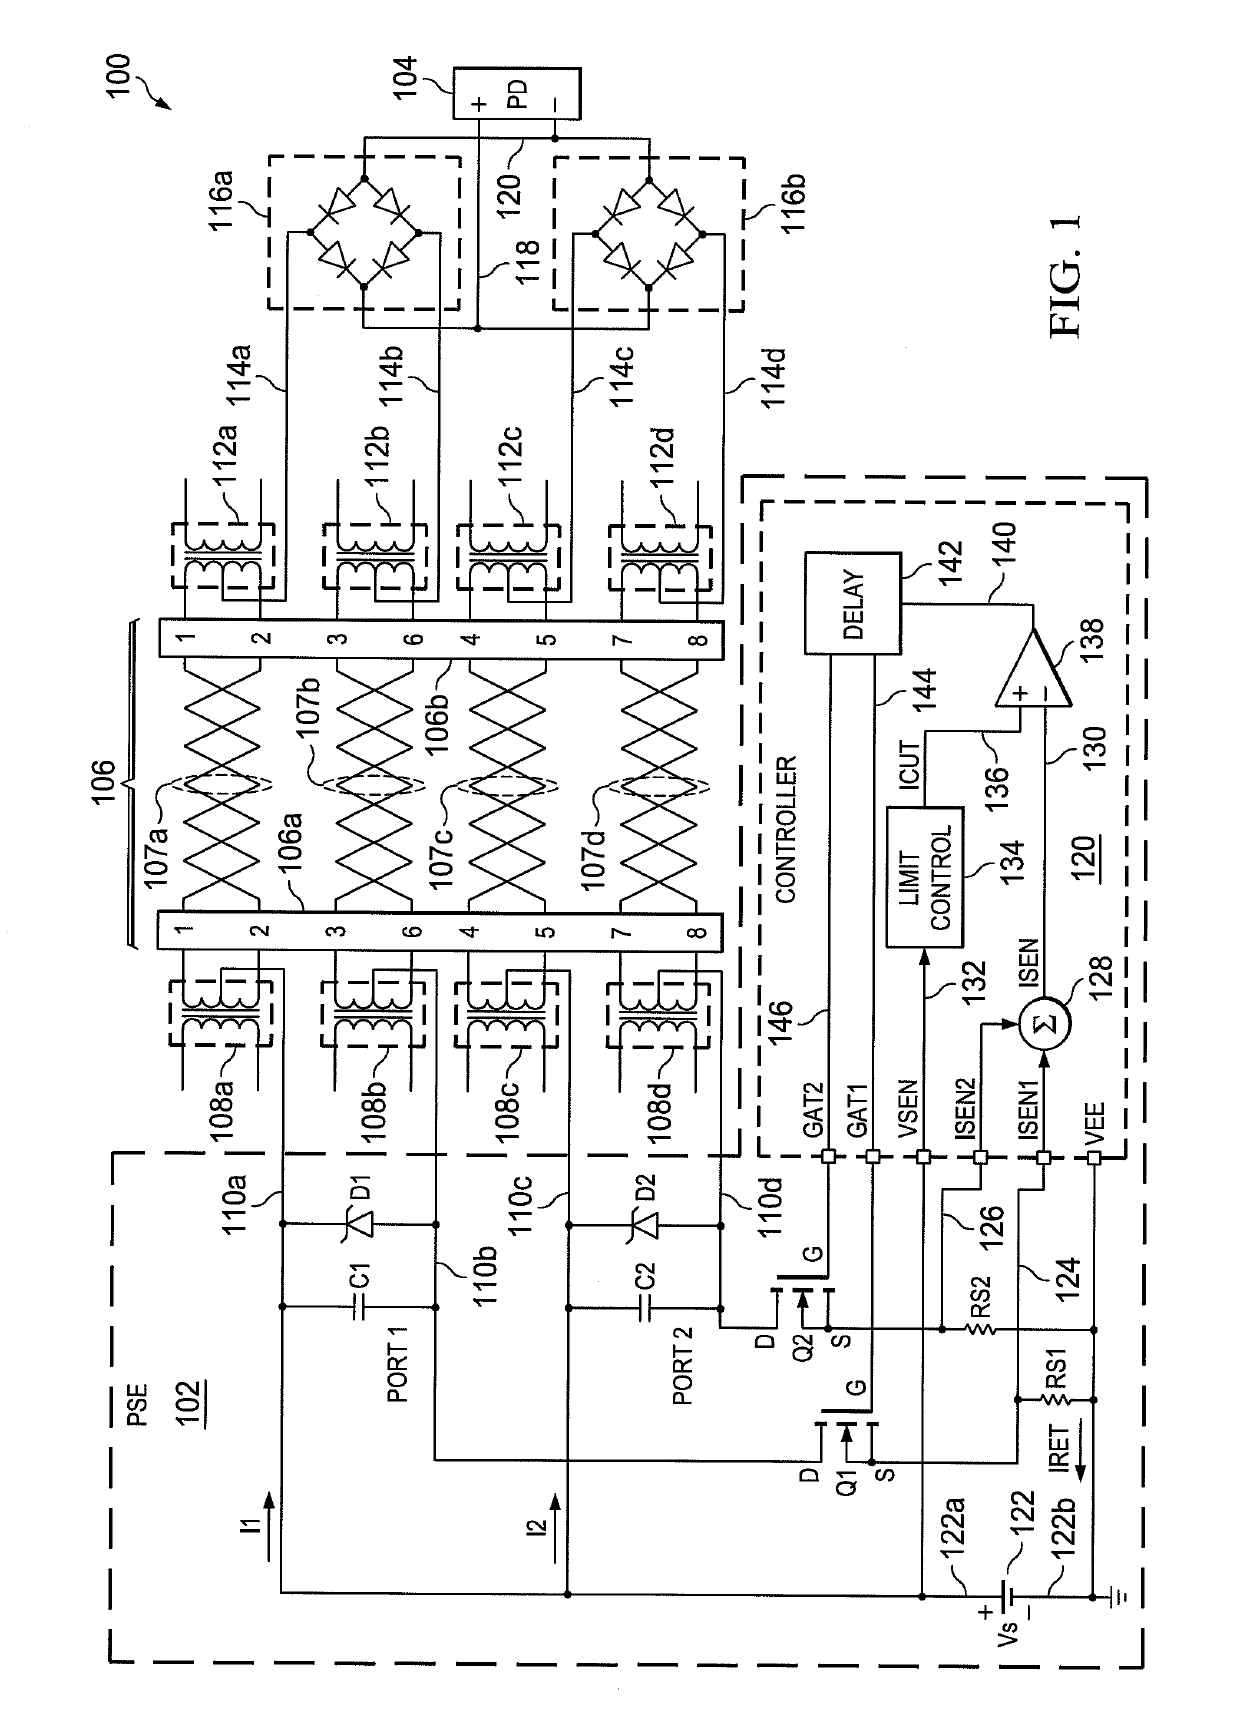 System and method for controlling power delivered to a powered device through a communication cable